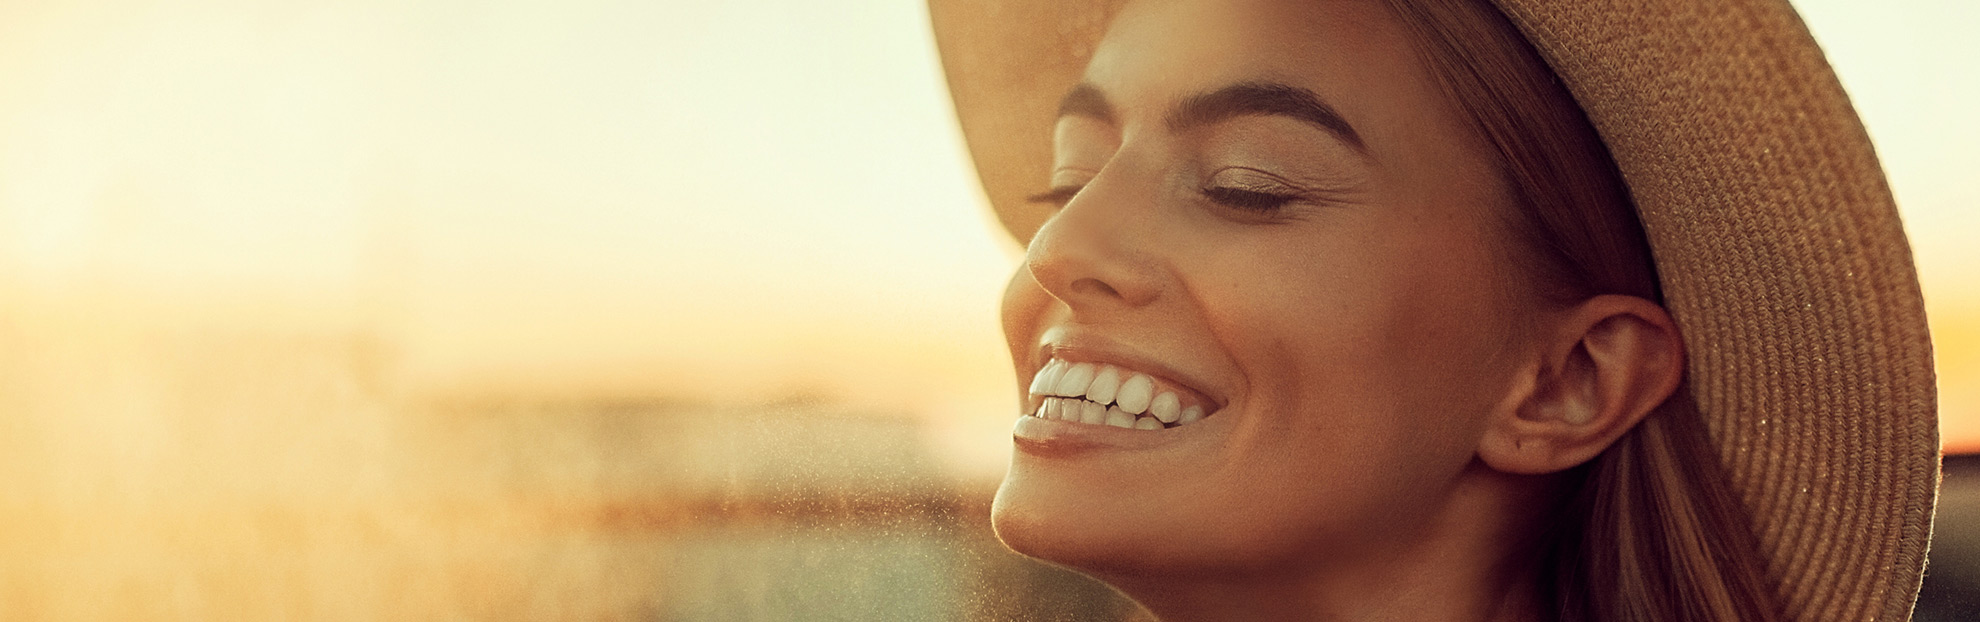 Smiling eye care patient wearing a hat at golden hour